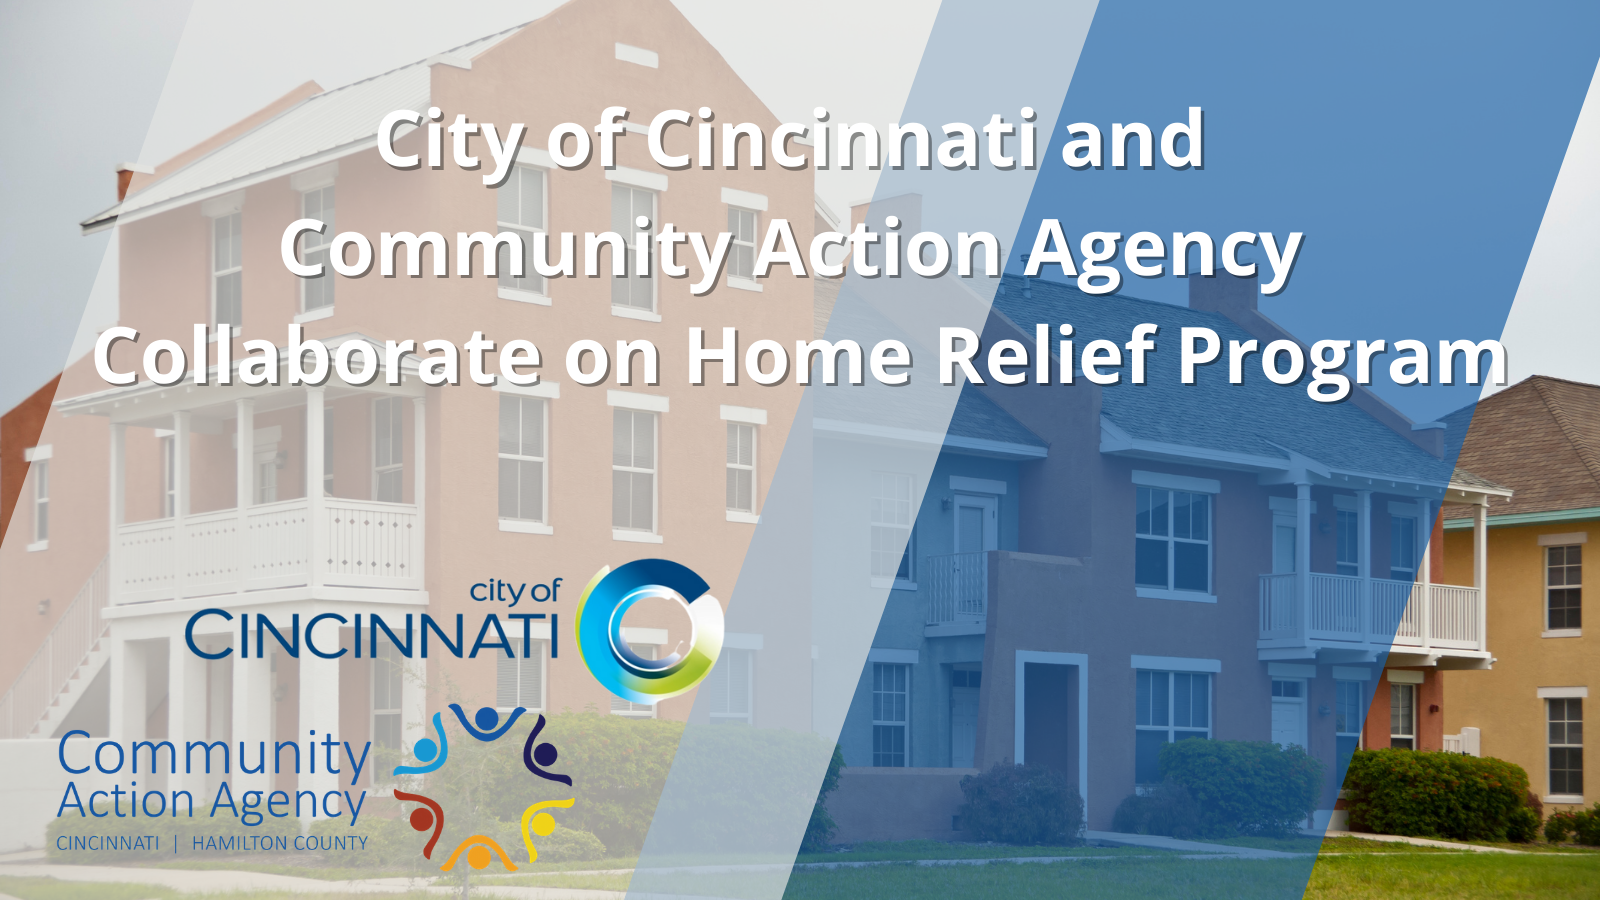 The City of Cincinnati is proud to announce a new partnership with the Community Action Agency (CAA) intended to assist households who have fallen behind on rent and utility bills due to the COVID-19 pandemic.